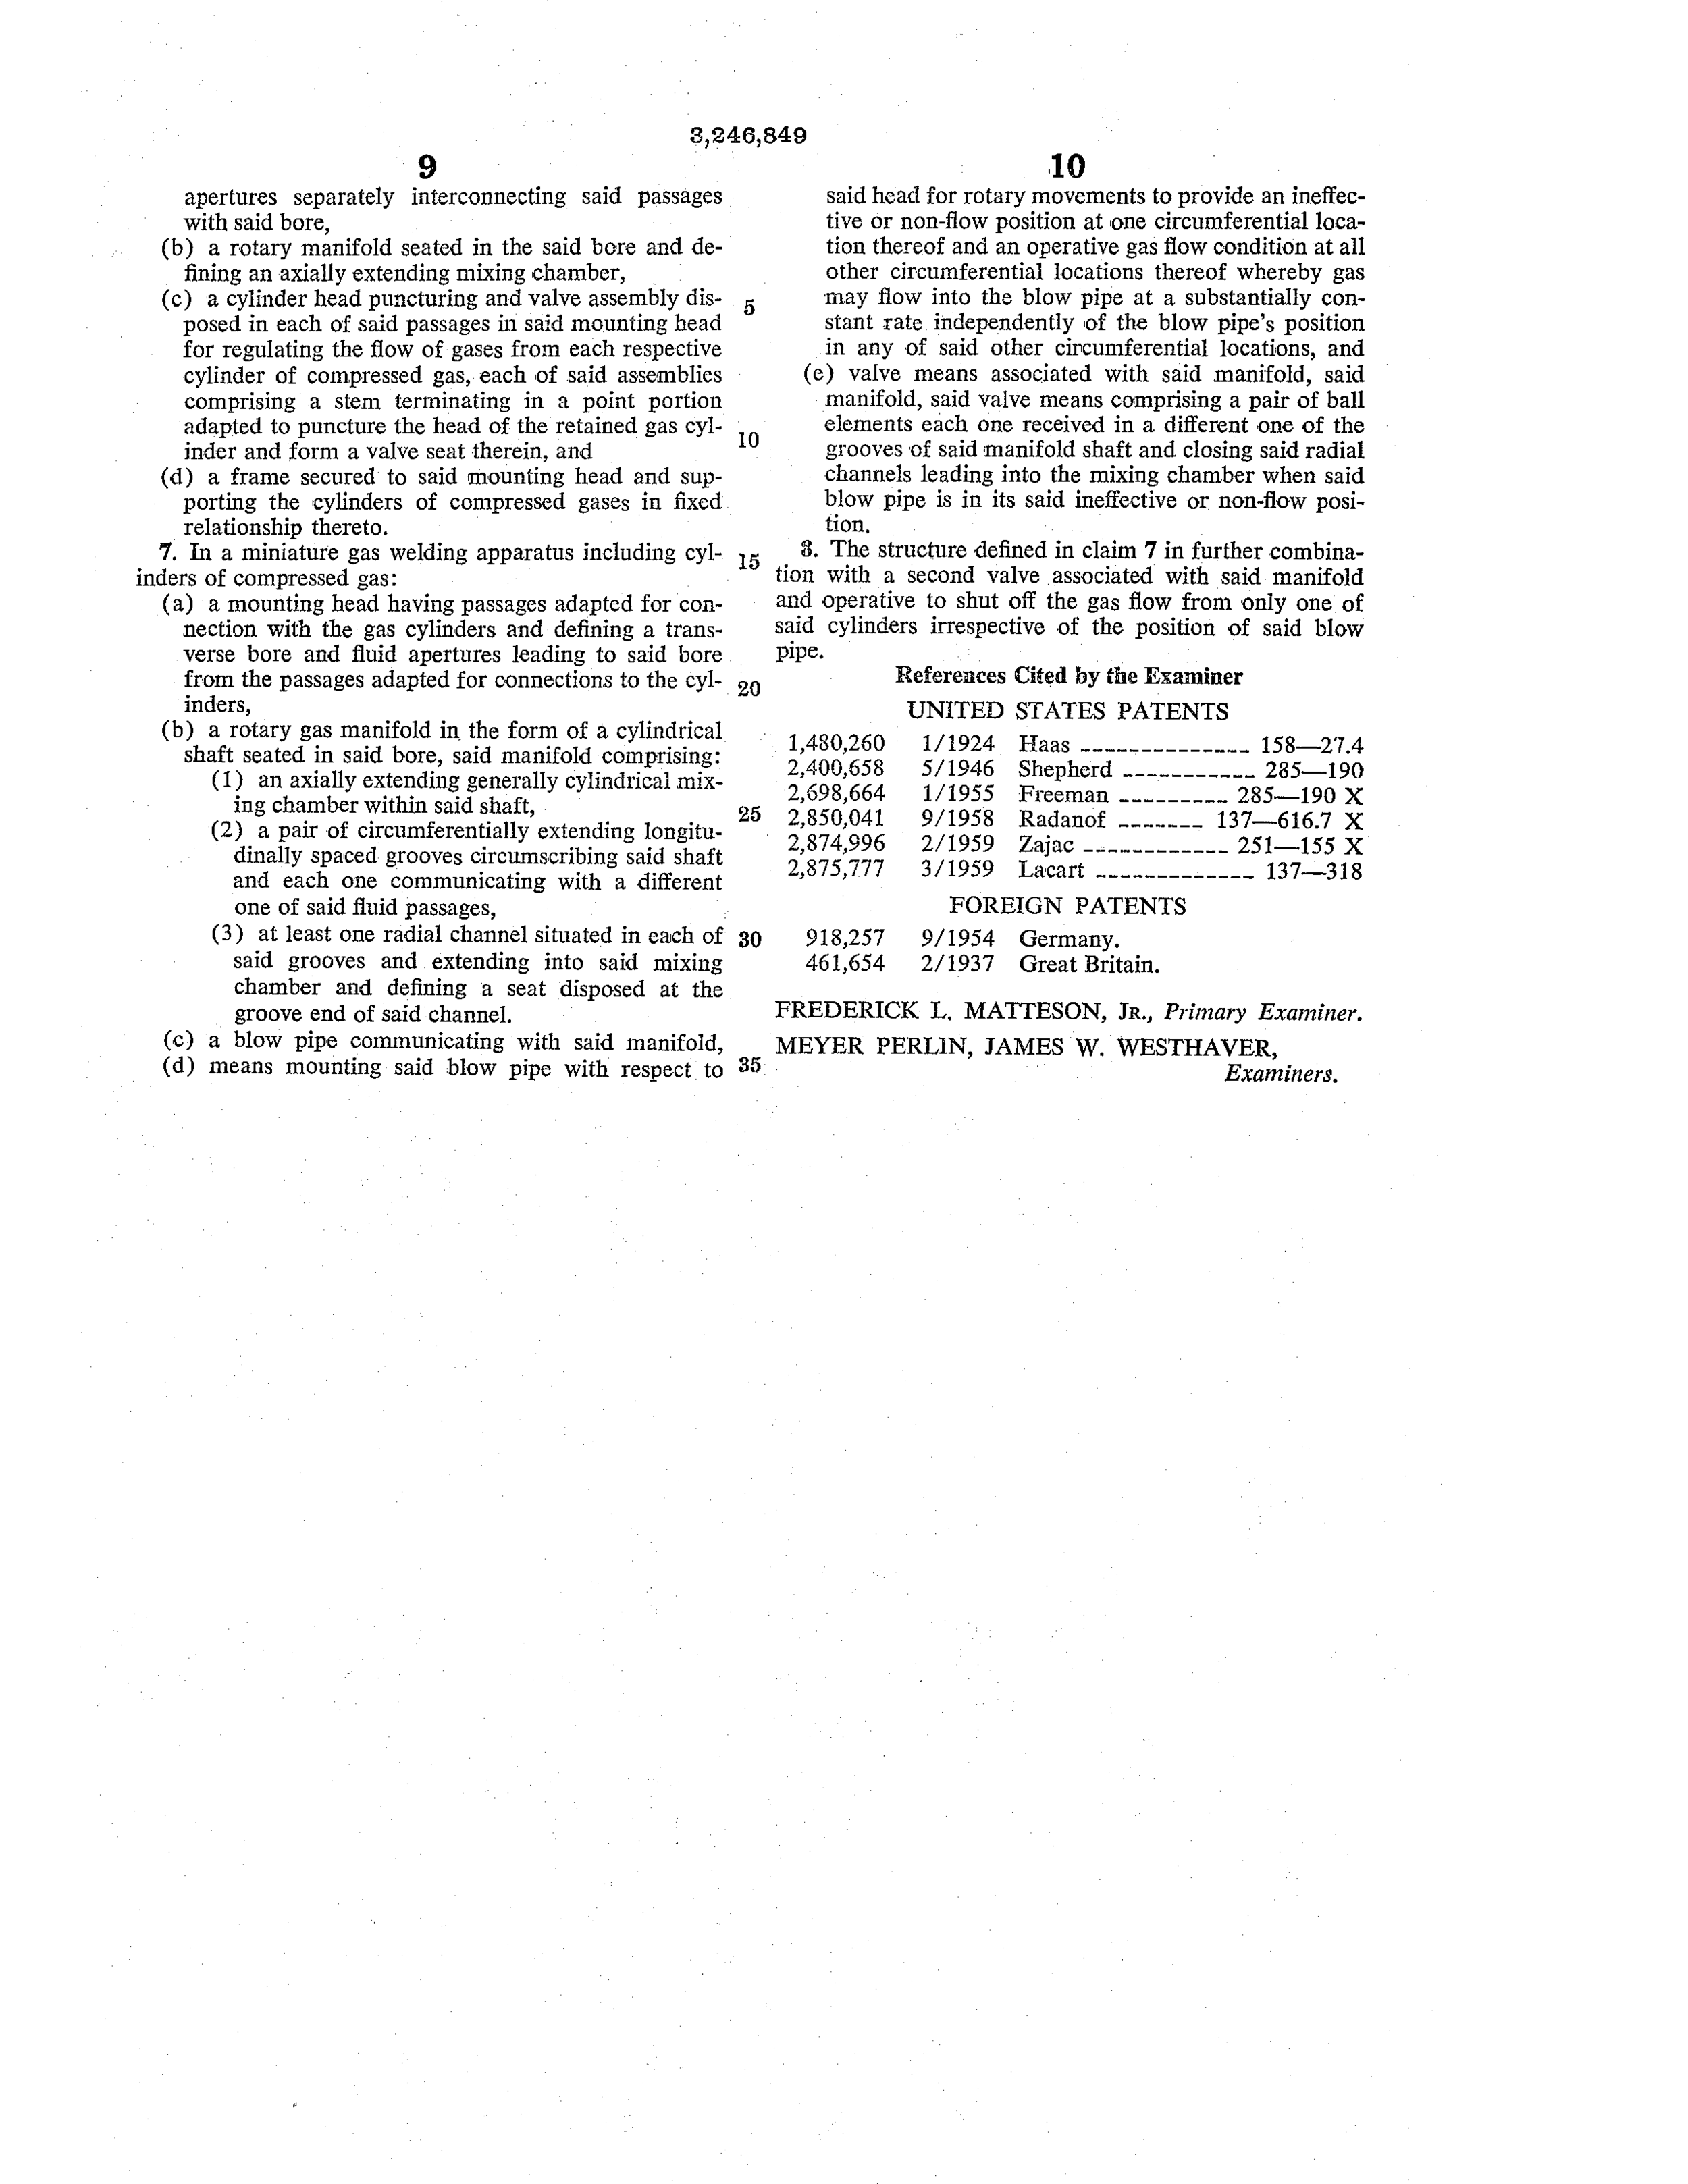 patent1_Page_8.png